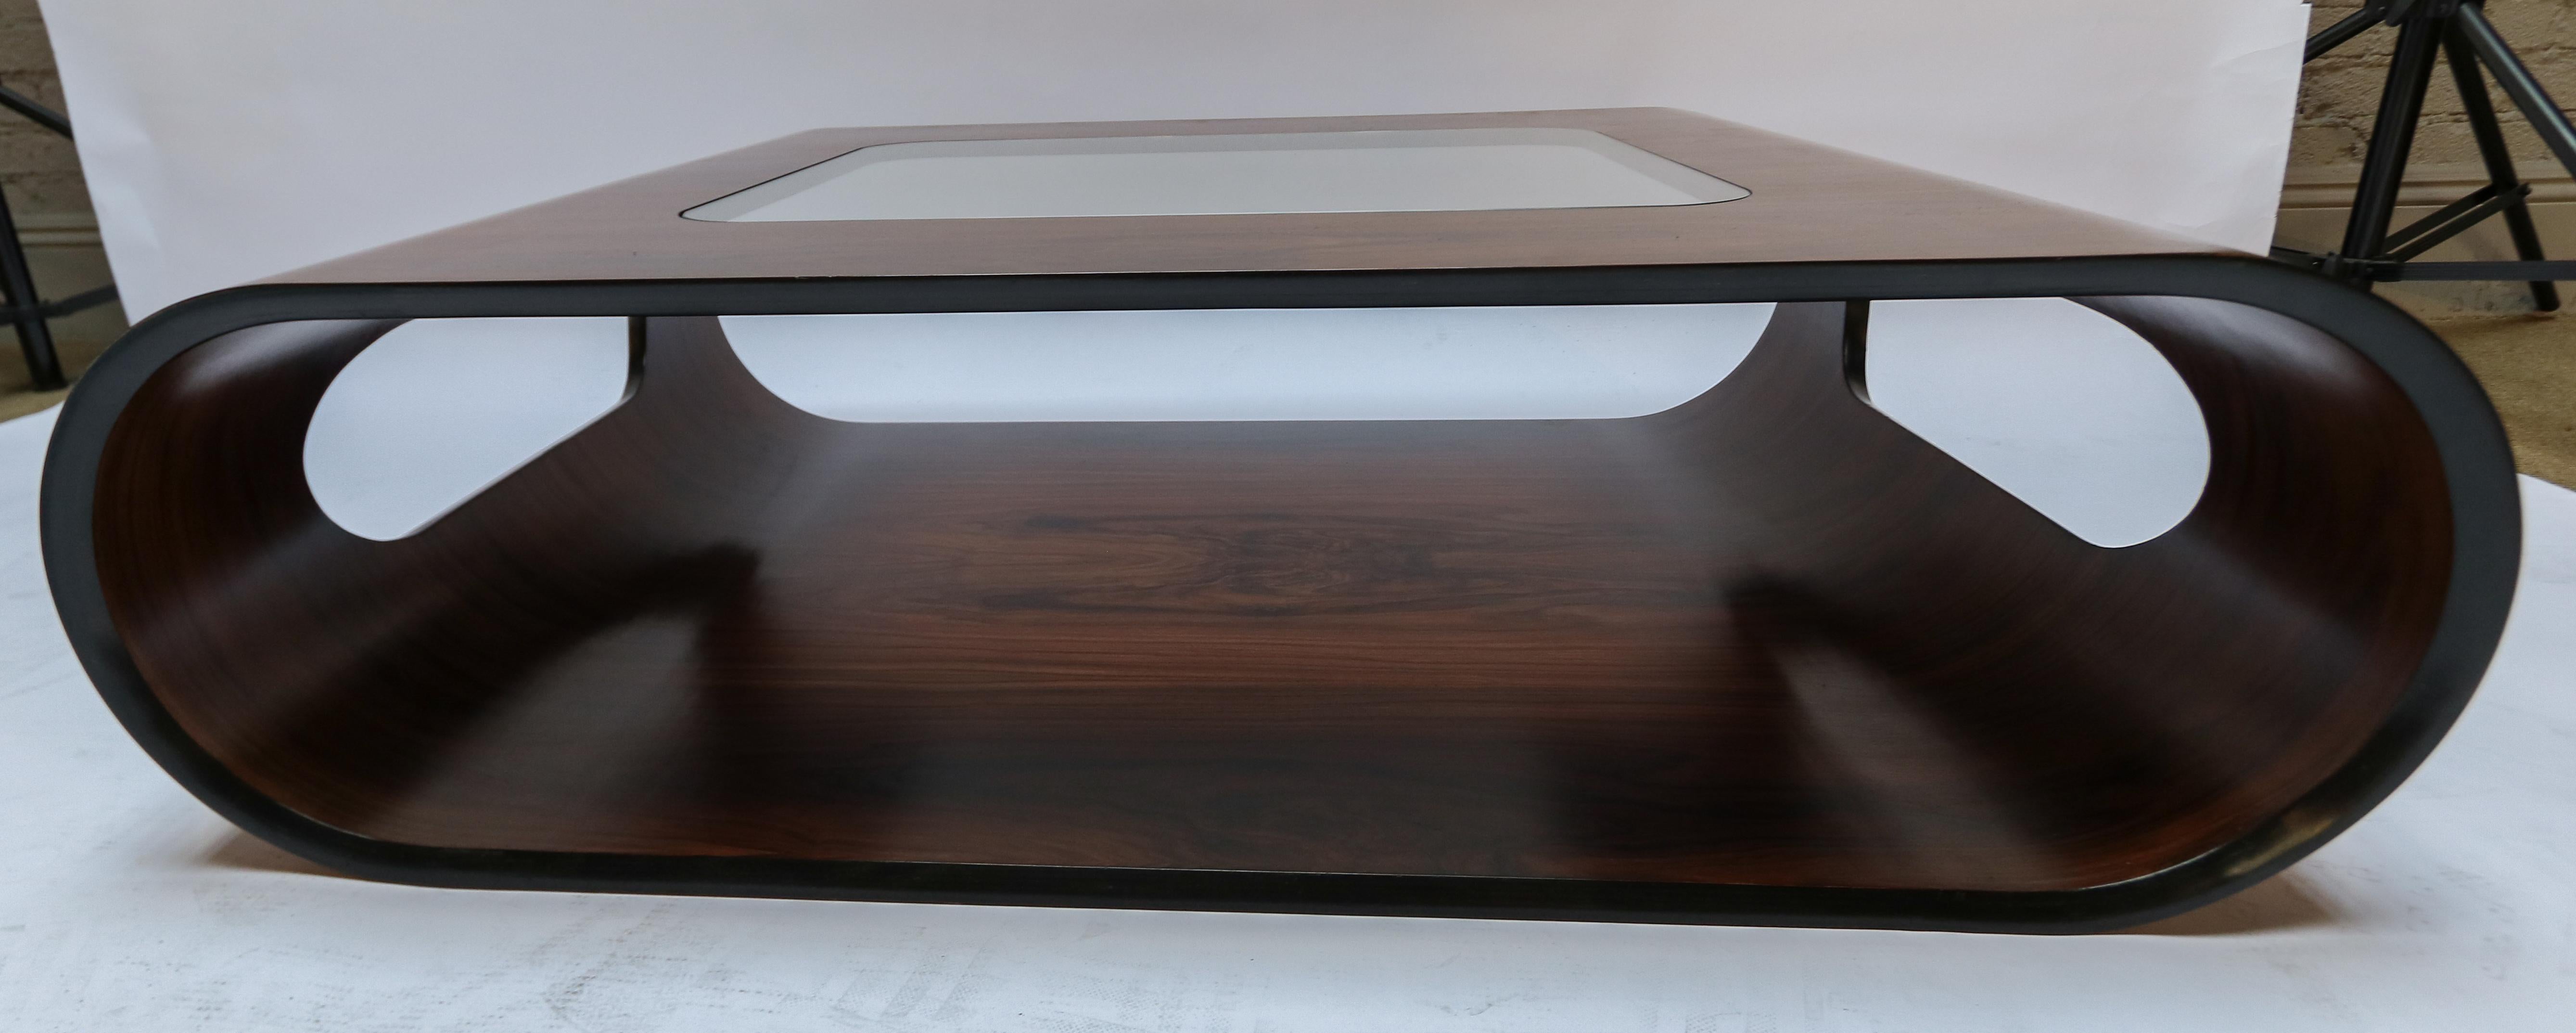 Custom Midcentury Style Rosewood Coffee Table with Glass Top by Adesso Imports 1